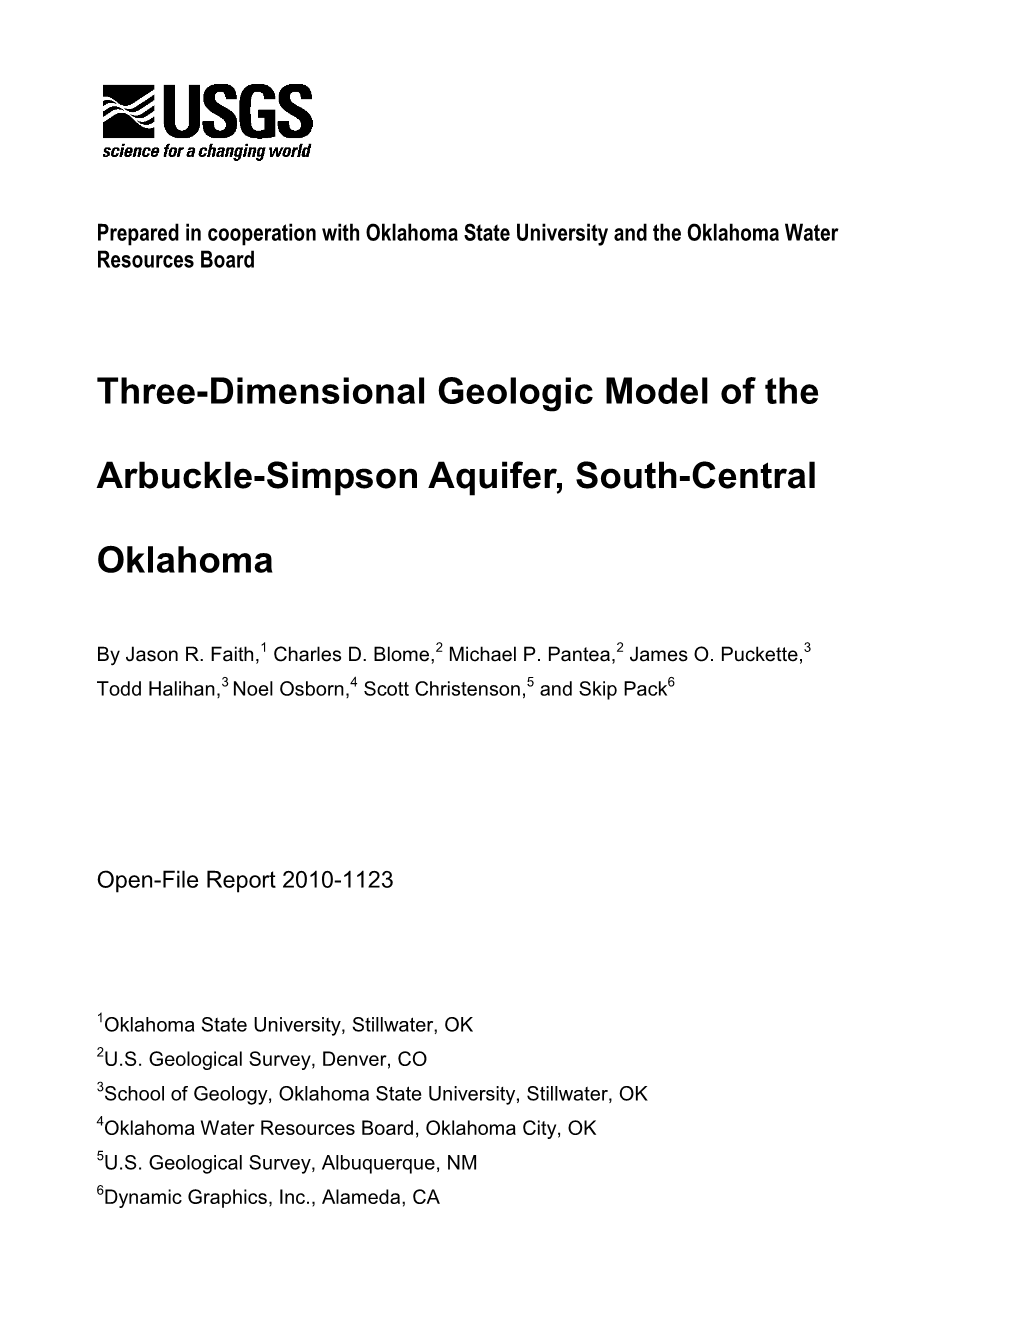 Three-Dimensional Geologic Model of the Arbuckle-Simpson Aquifer, South-Central Oklahoma